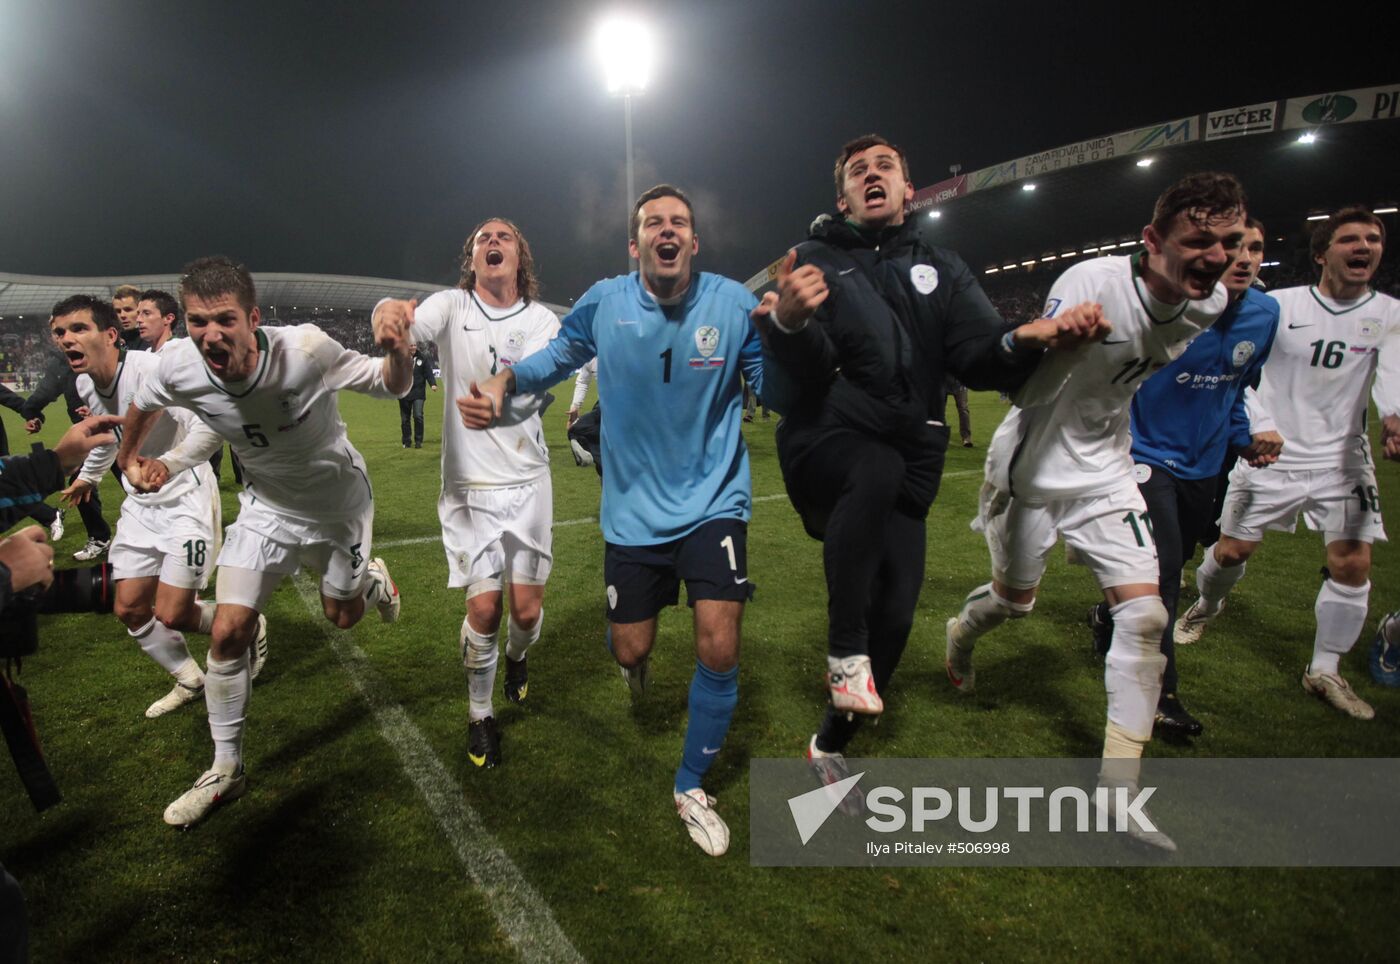 2010 World Cup qualifier playoff: Slovenia vs. Russia 1-0